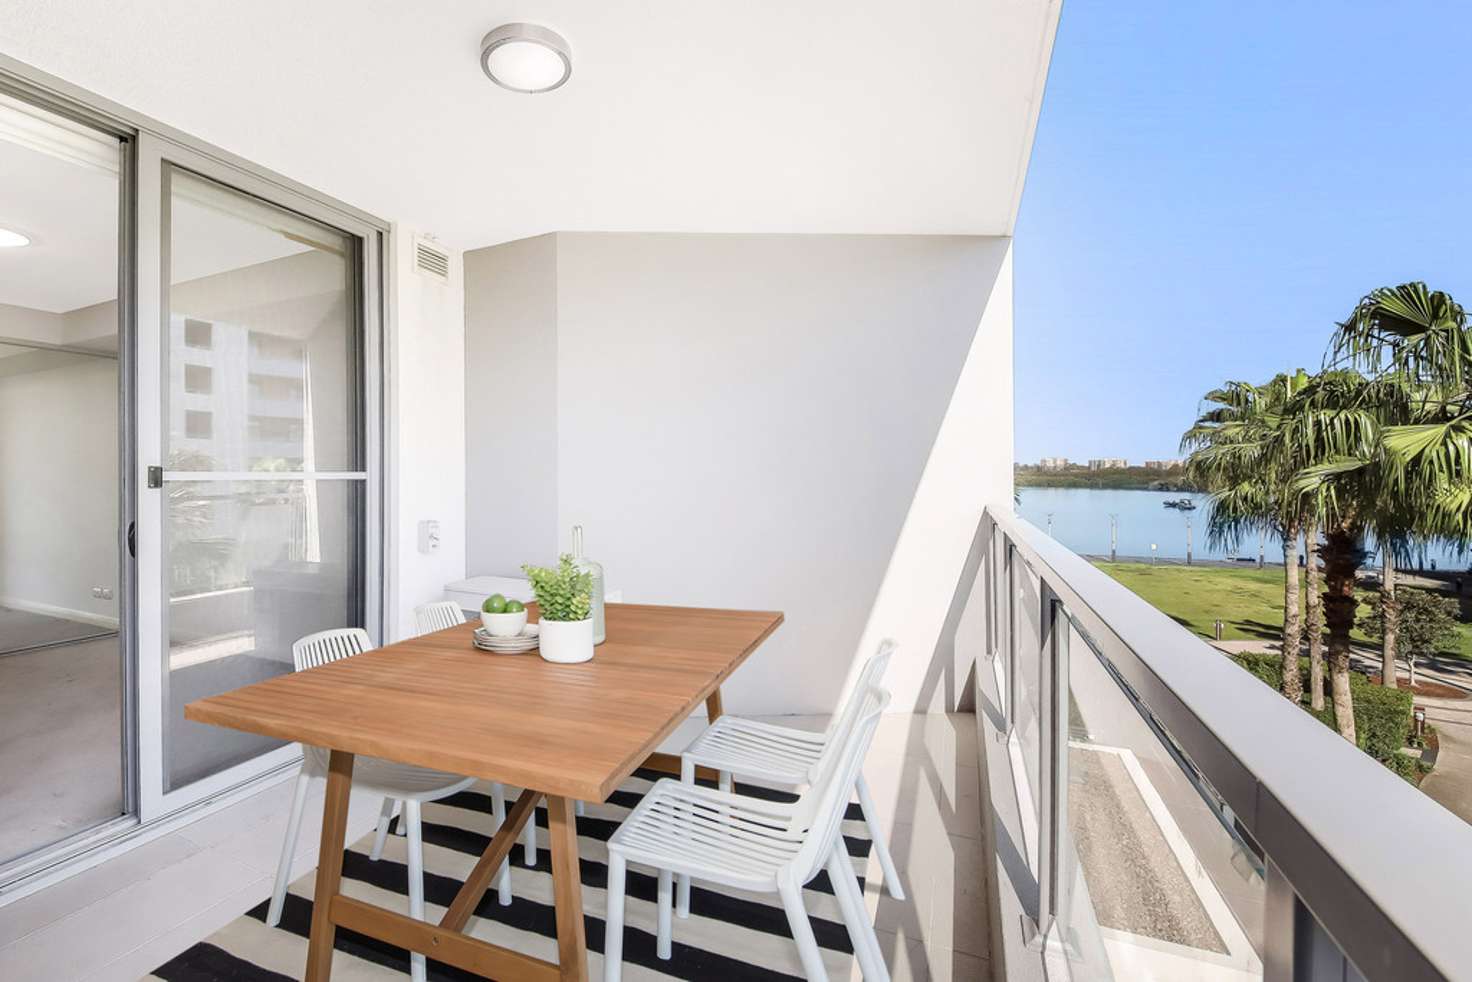 Main view of Homely apartment listing, 302/7 Stromboli Strait, Wentworth Point NSW 2127